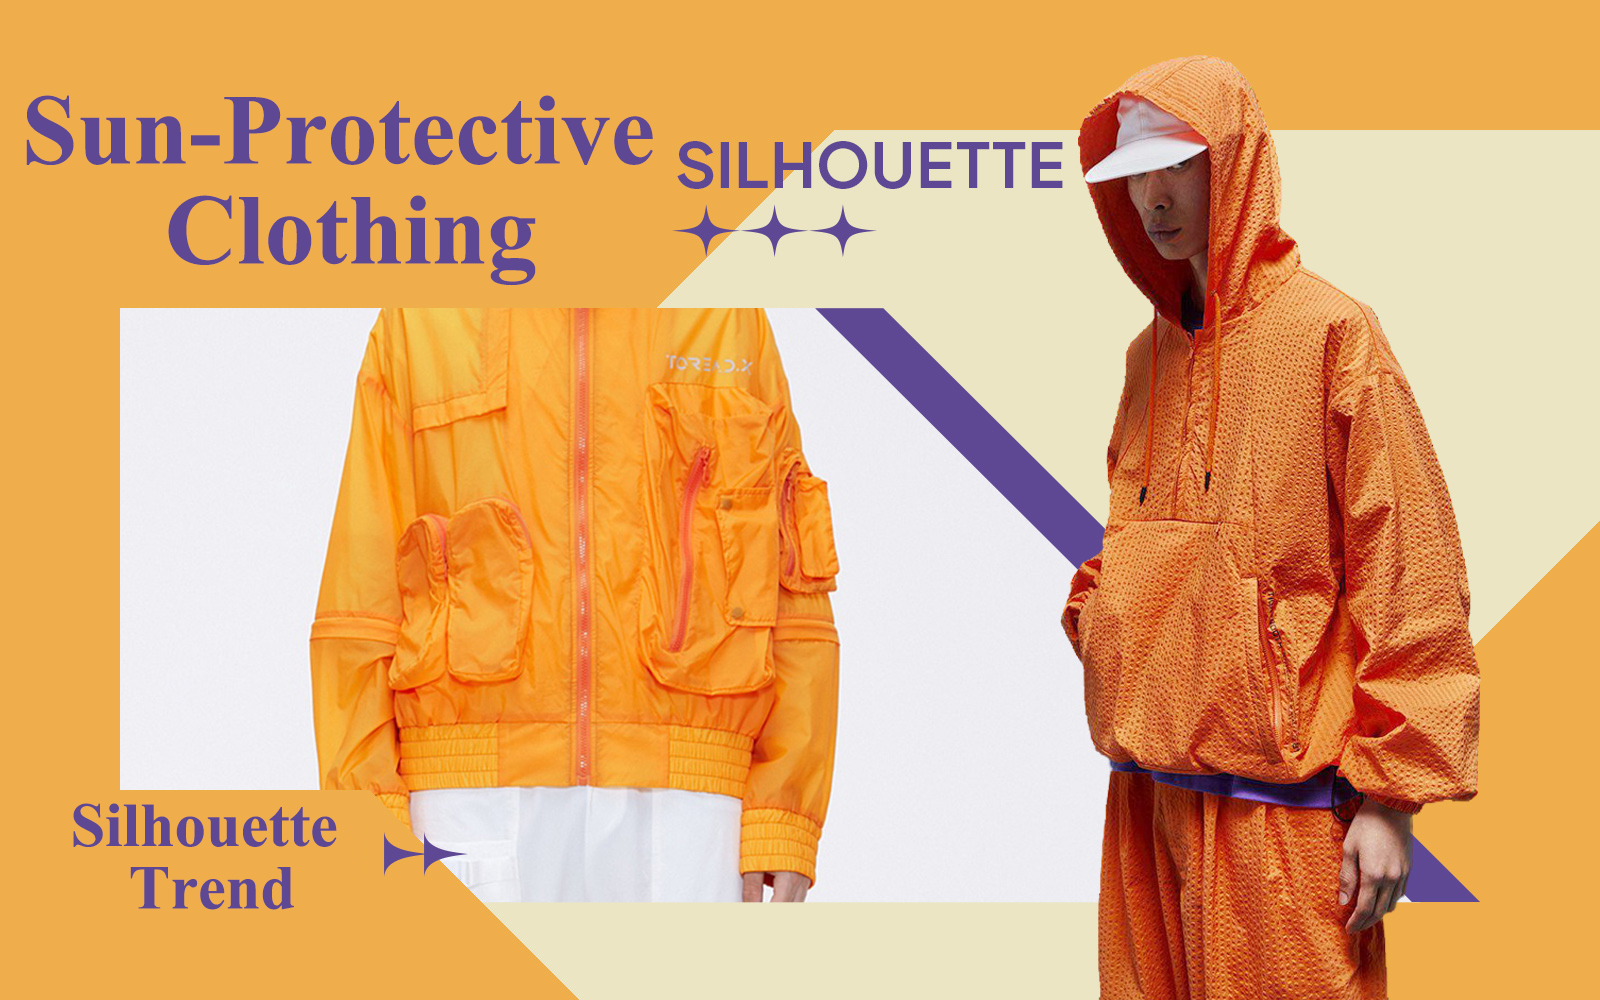 The Silhouette Trend for Men's Sun-protective Clothing